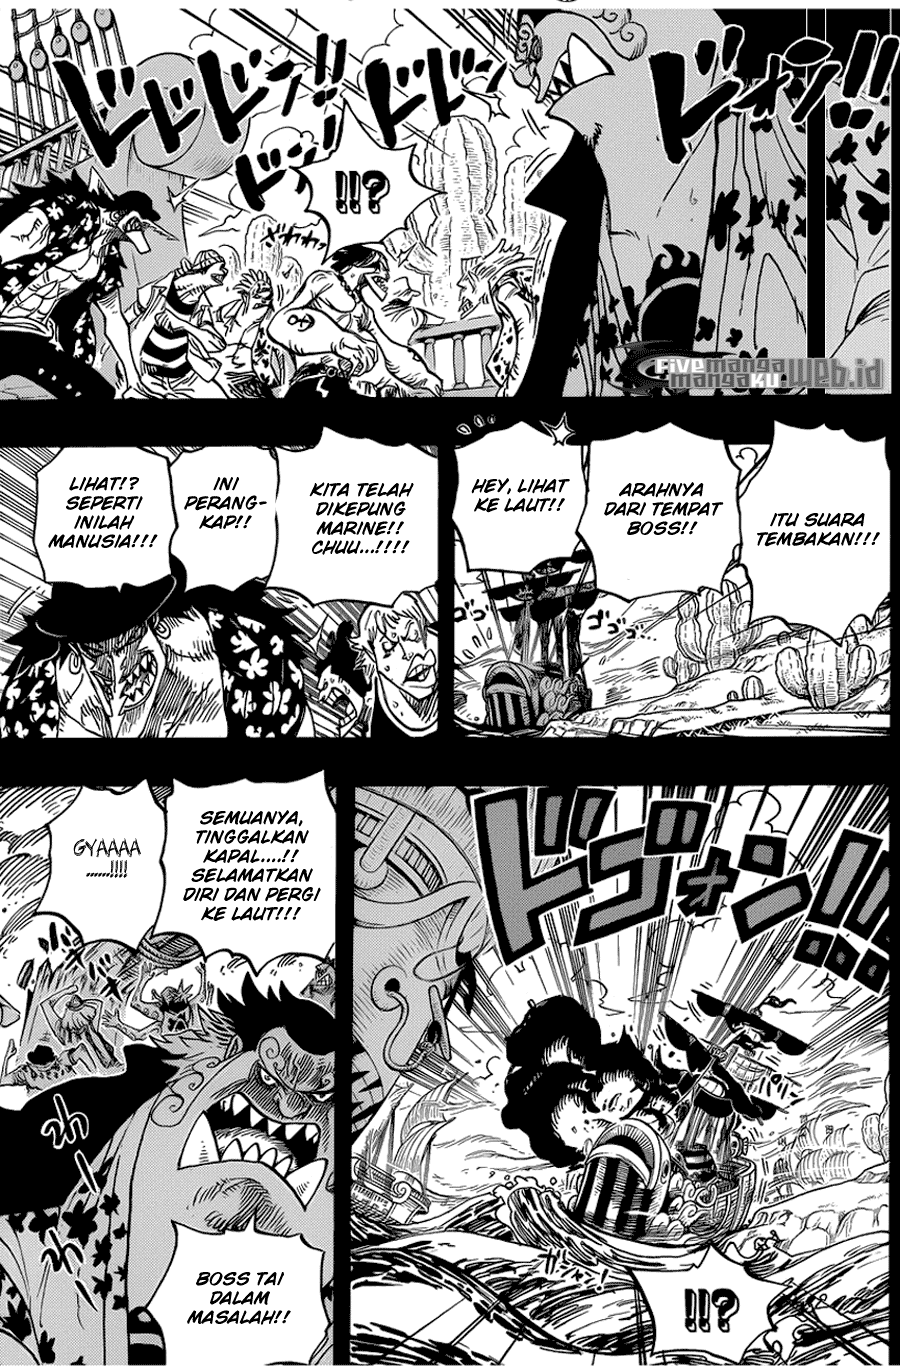 One Piece Chapter 623 – Si Bajak Laut Fisher Tiger - 141